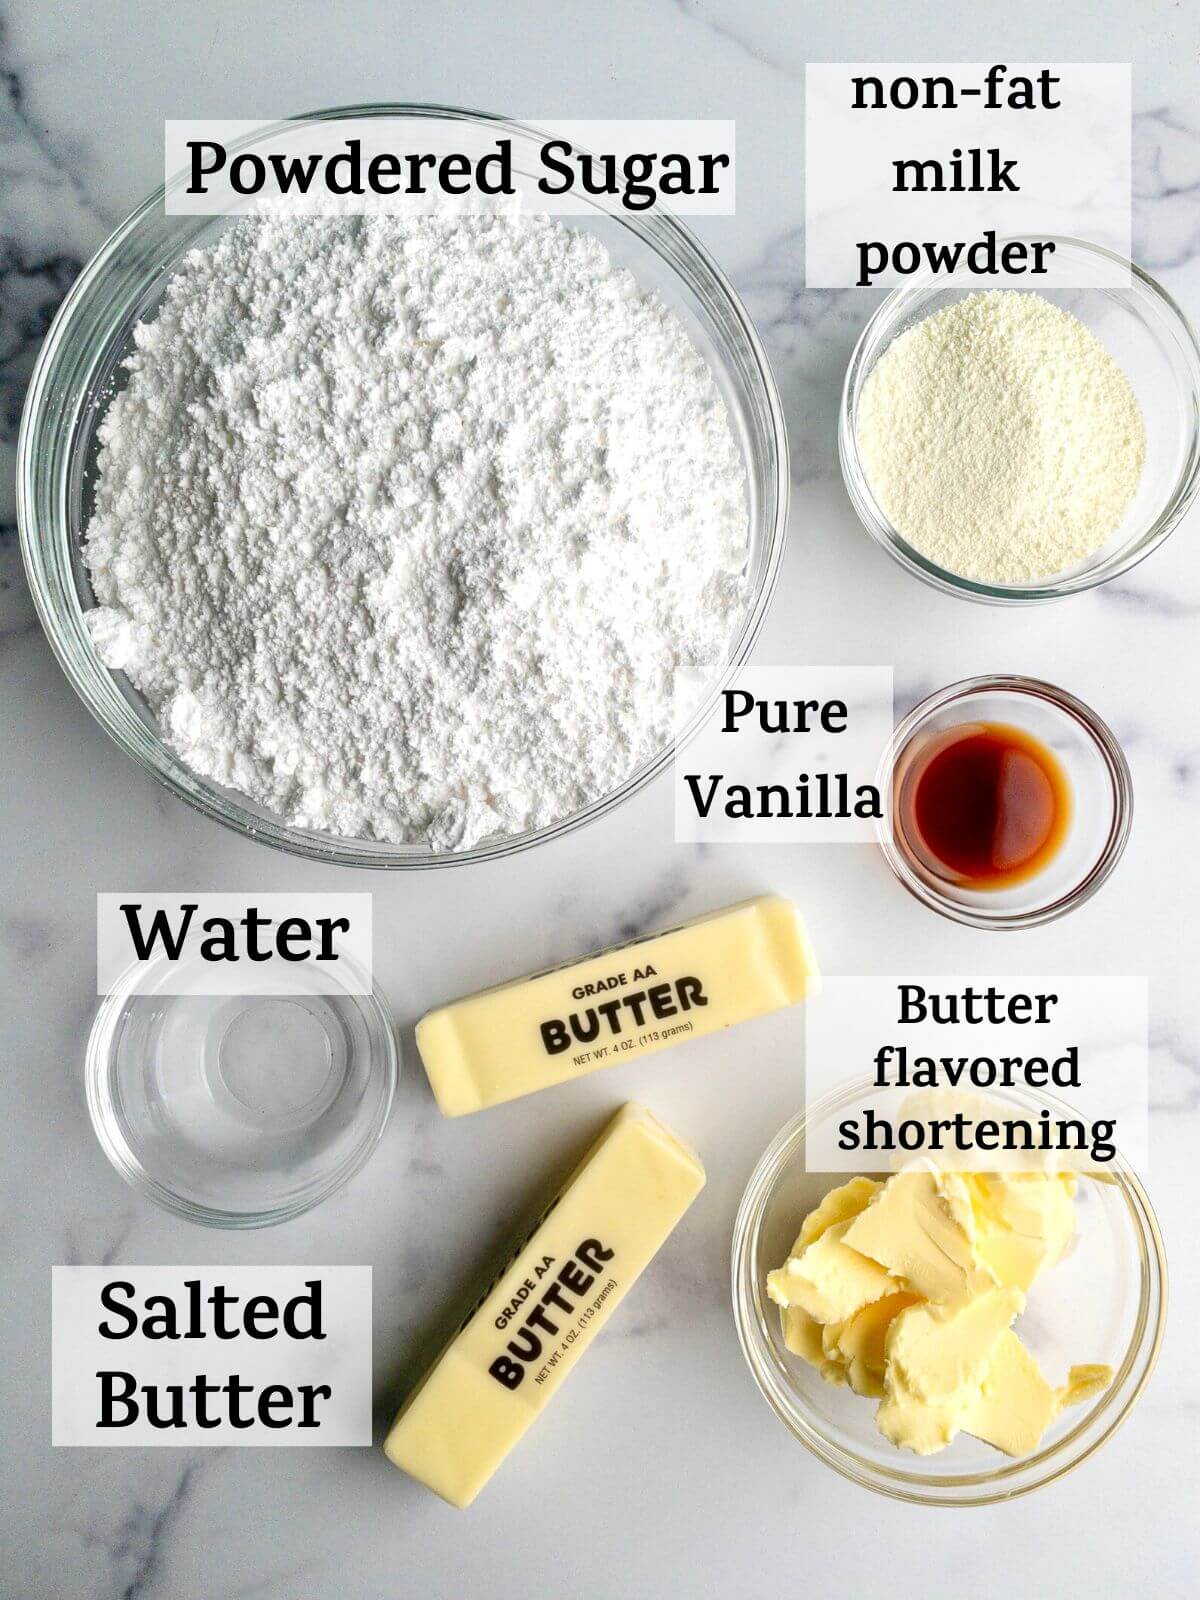 ingredients for cookie buttercream for cutout cookies, with the text "powdered sugar, water, nonfat milk powder, salted butter, butter flavored shortening"